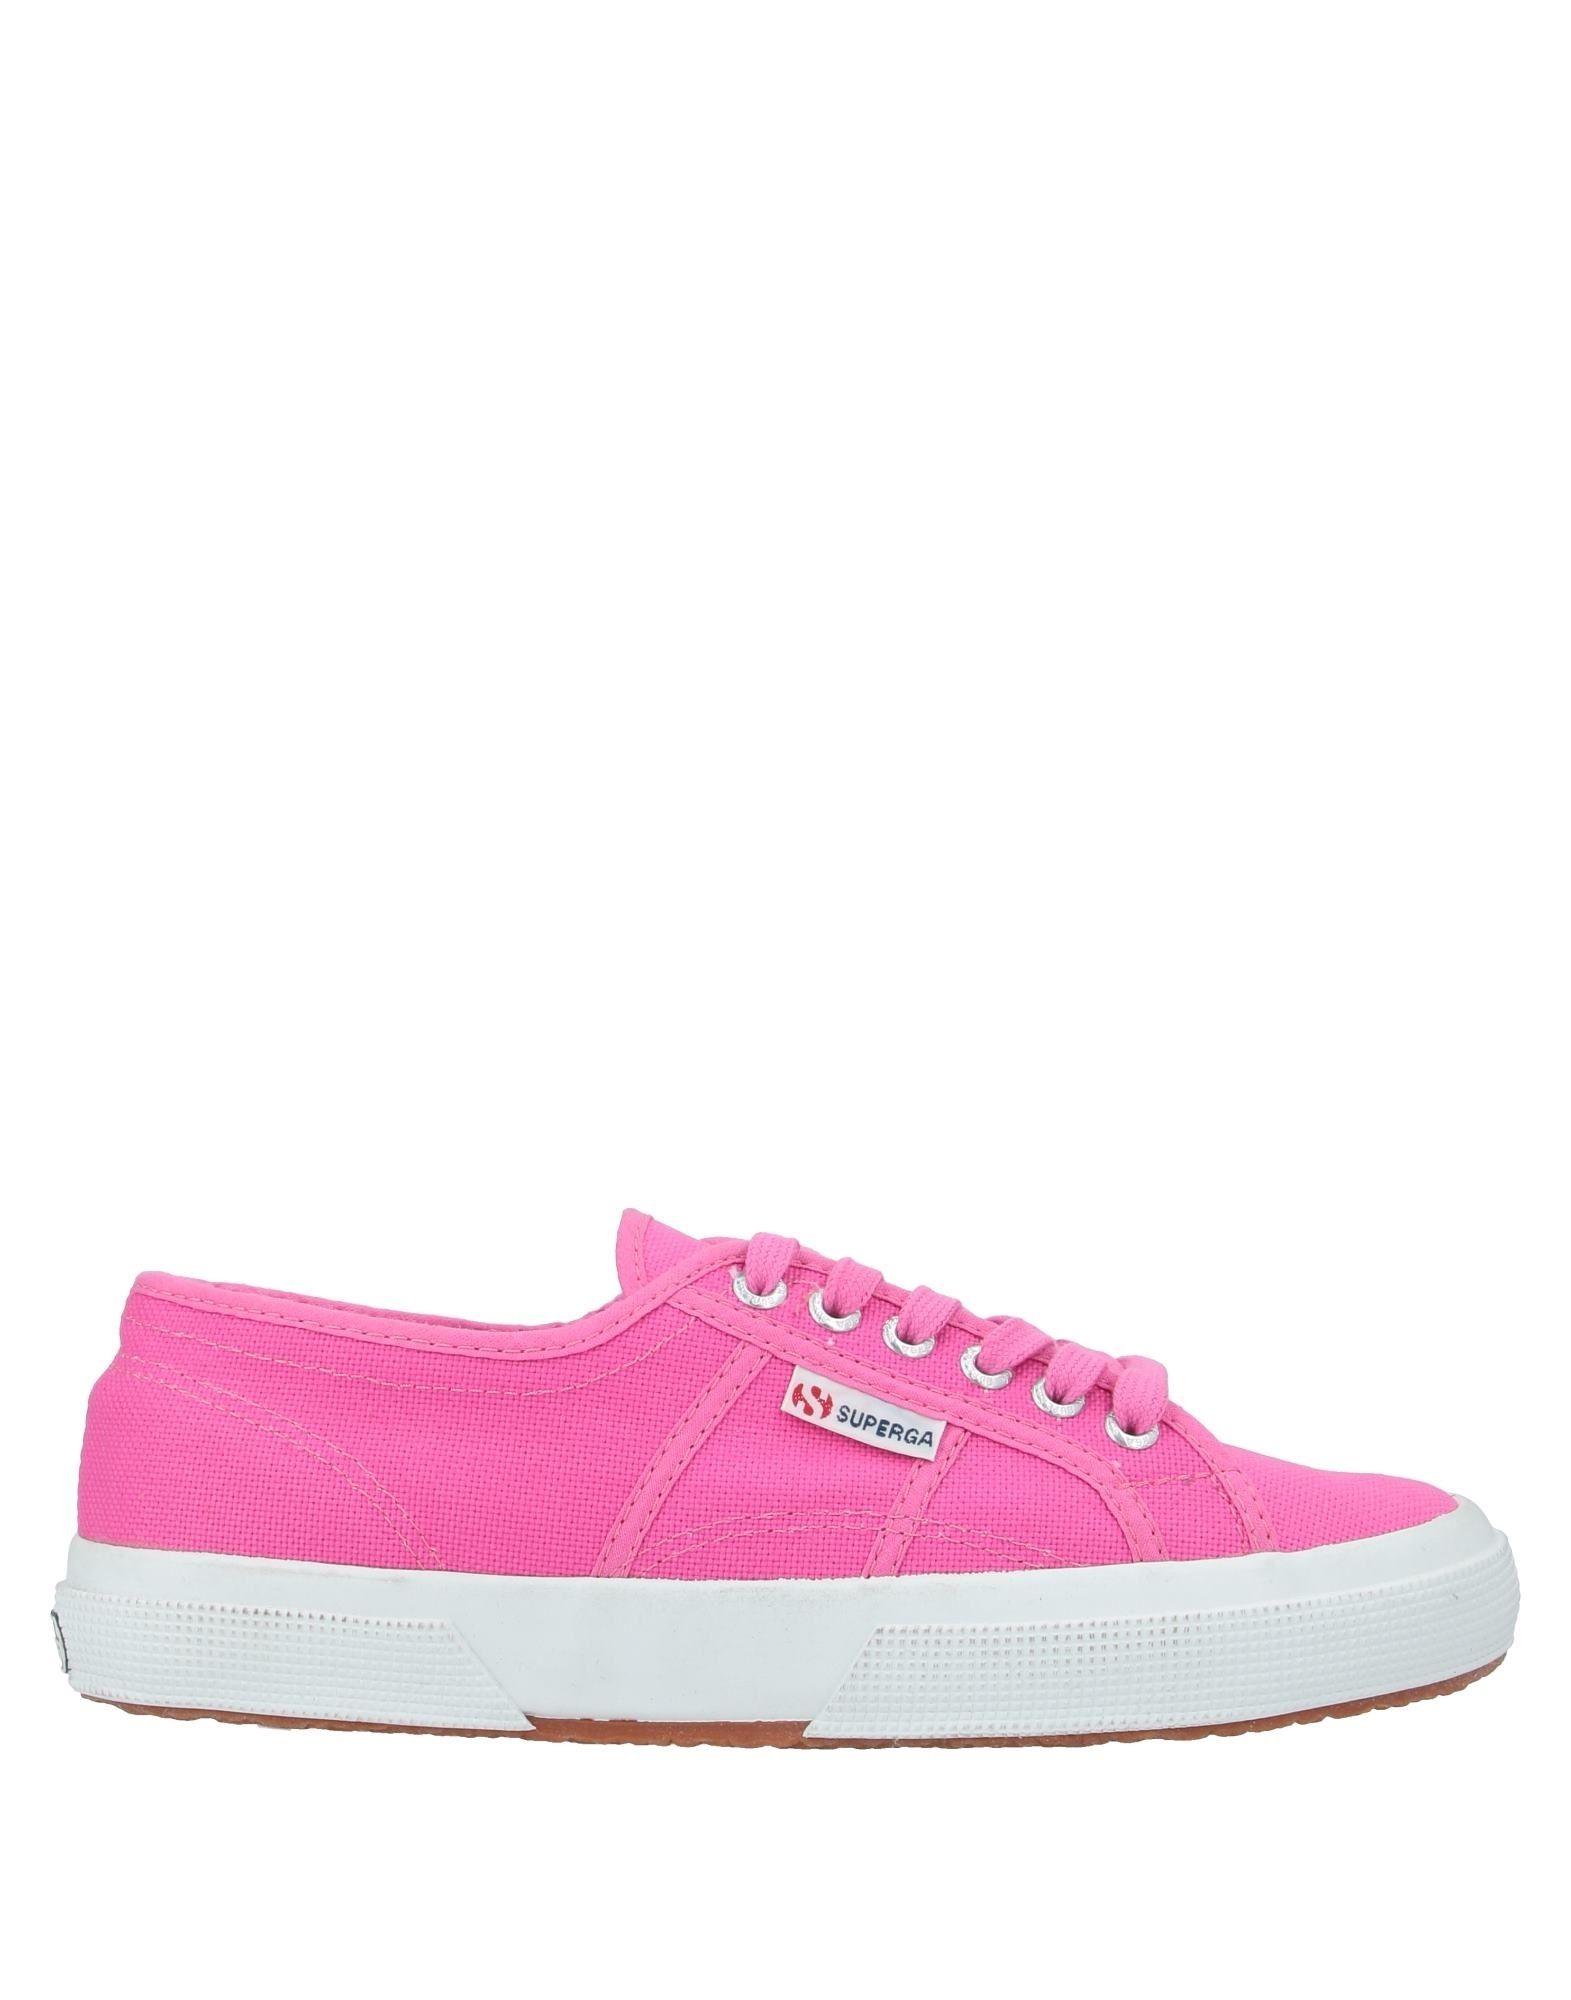 Superga Canvas Low-tops & Sneakers in Fuchsia (Pink) - Lyst